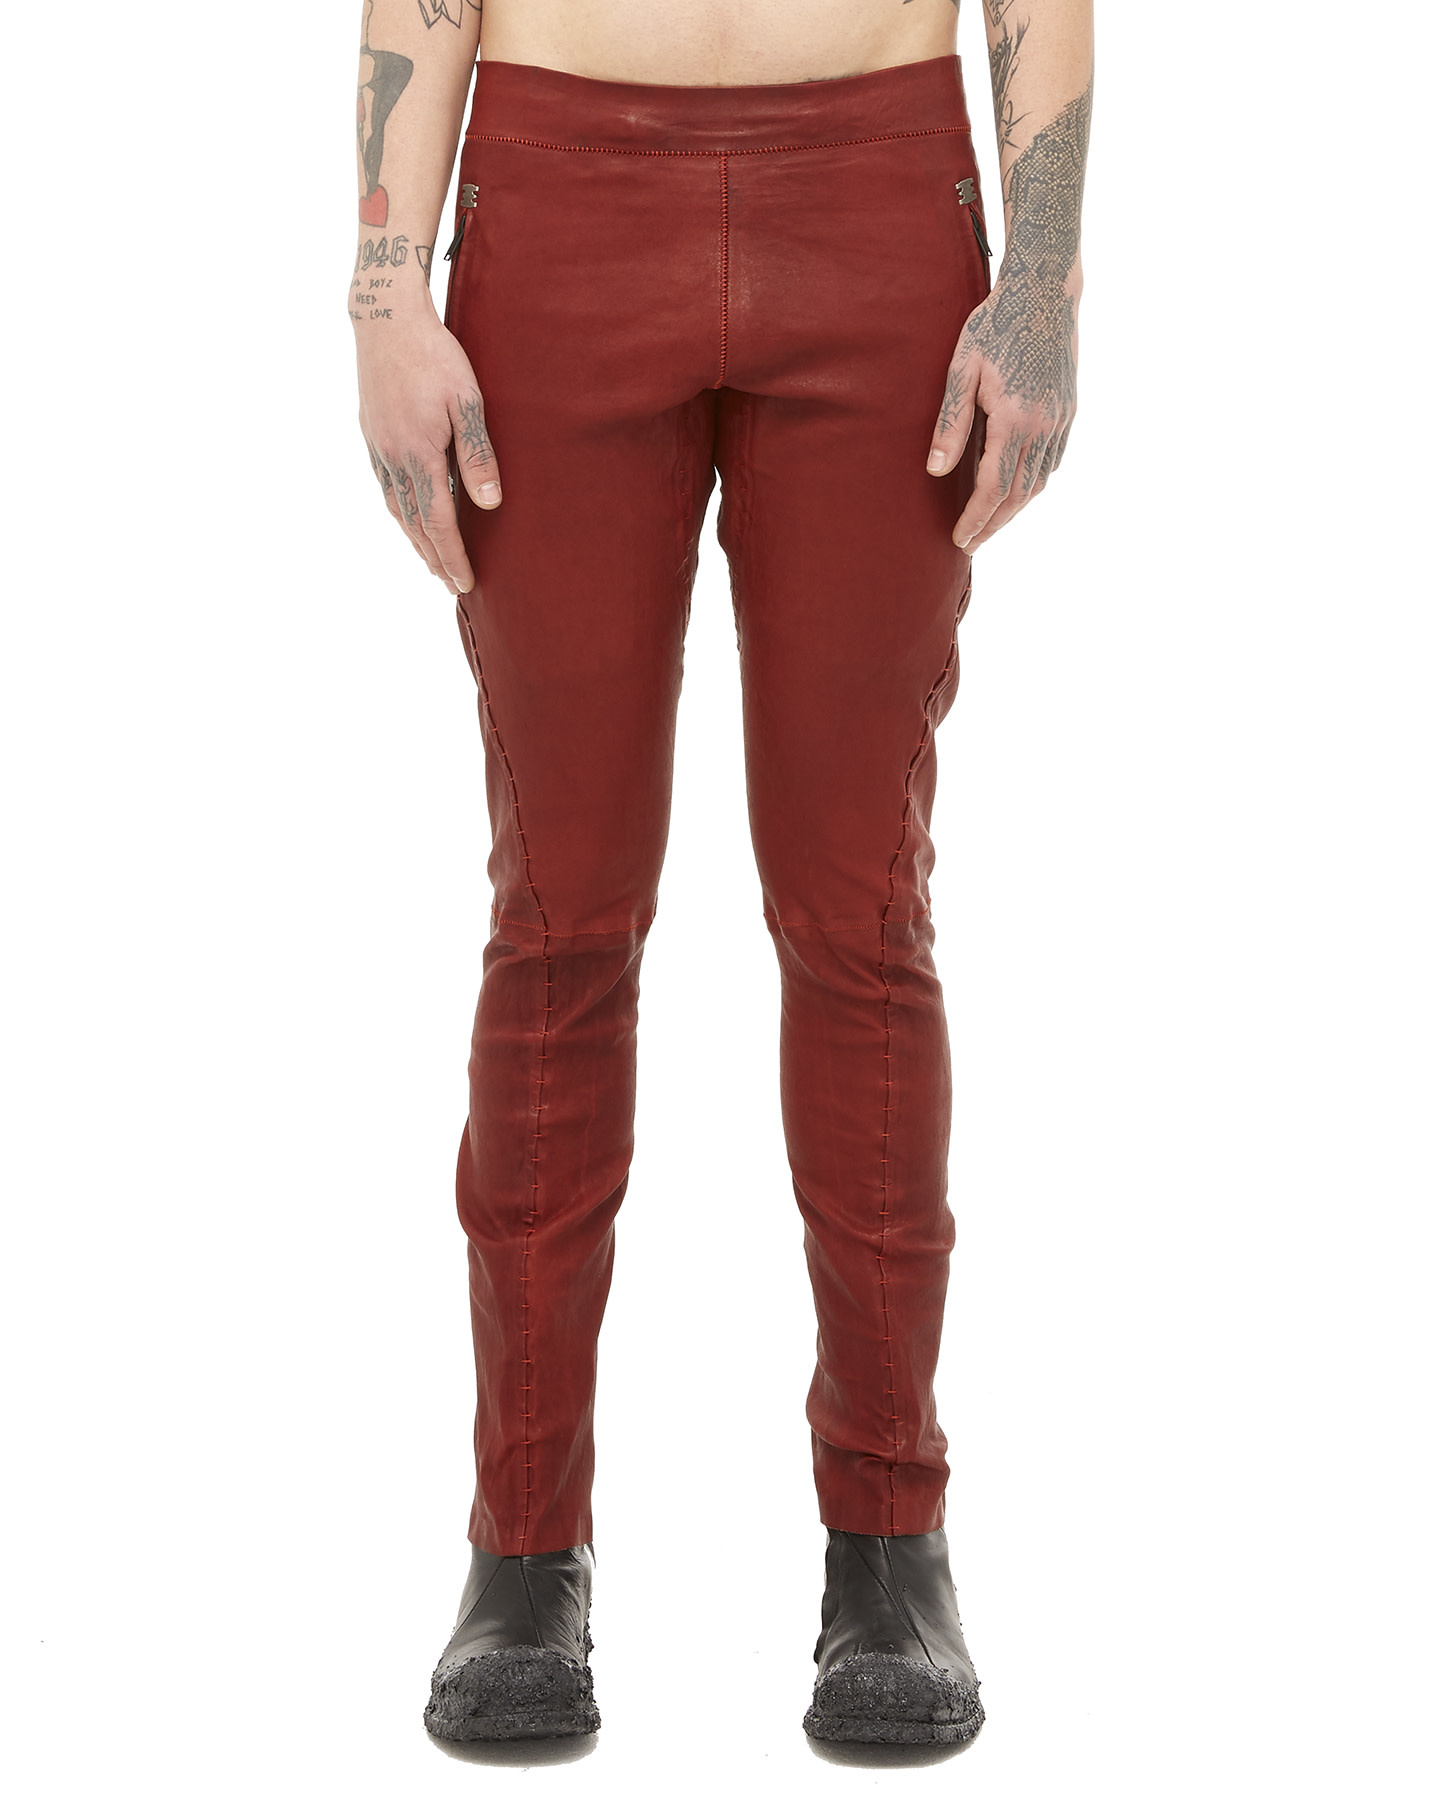 SOUSMARIN STRETCH LEATHER PANTS - OXBLOOD